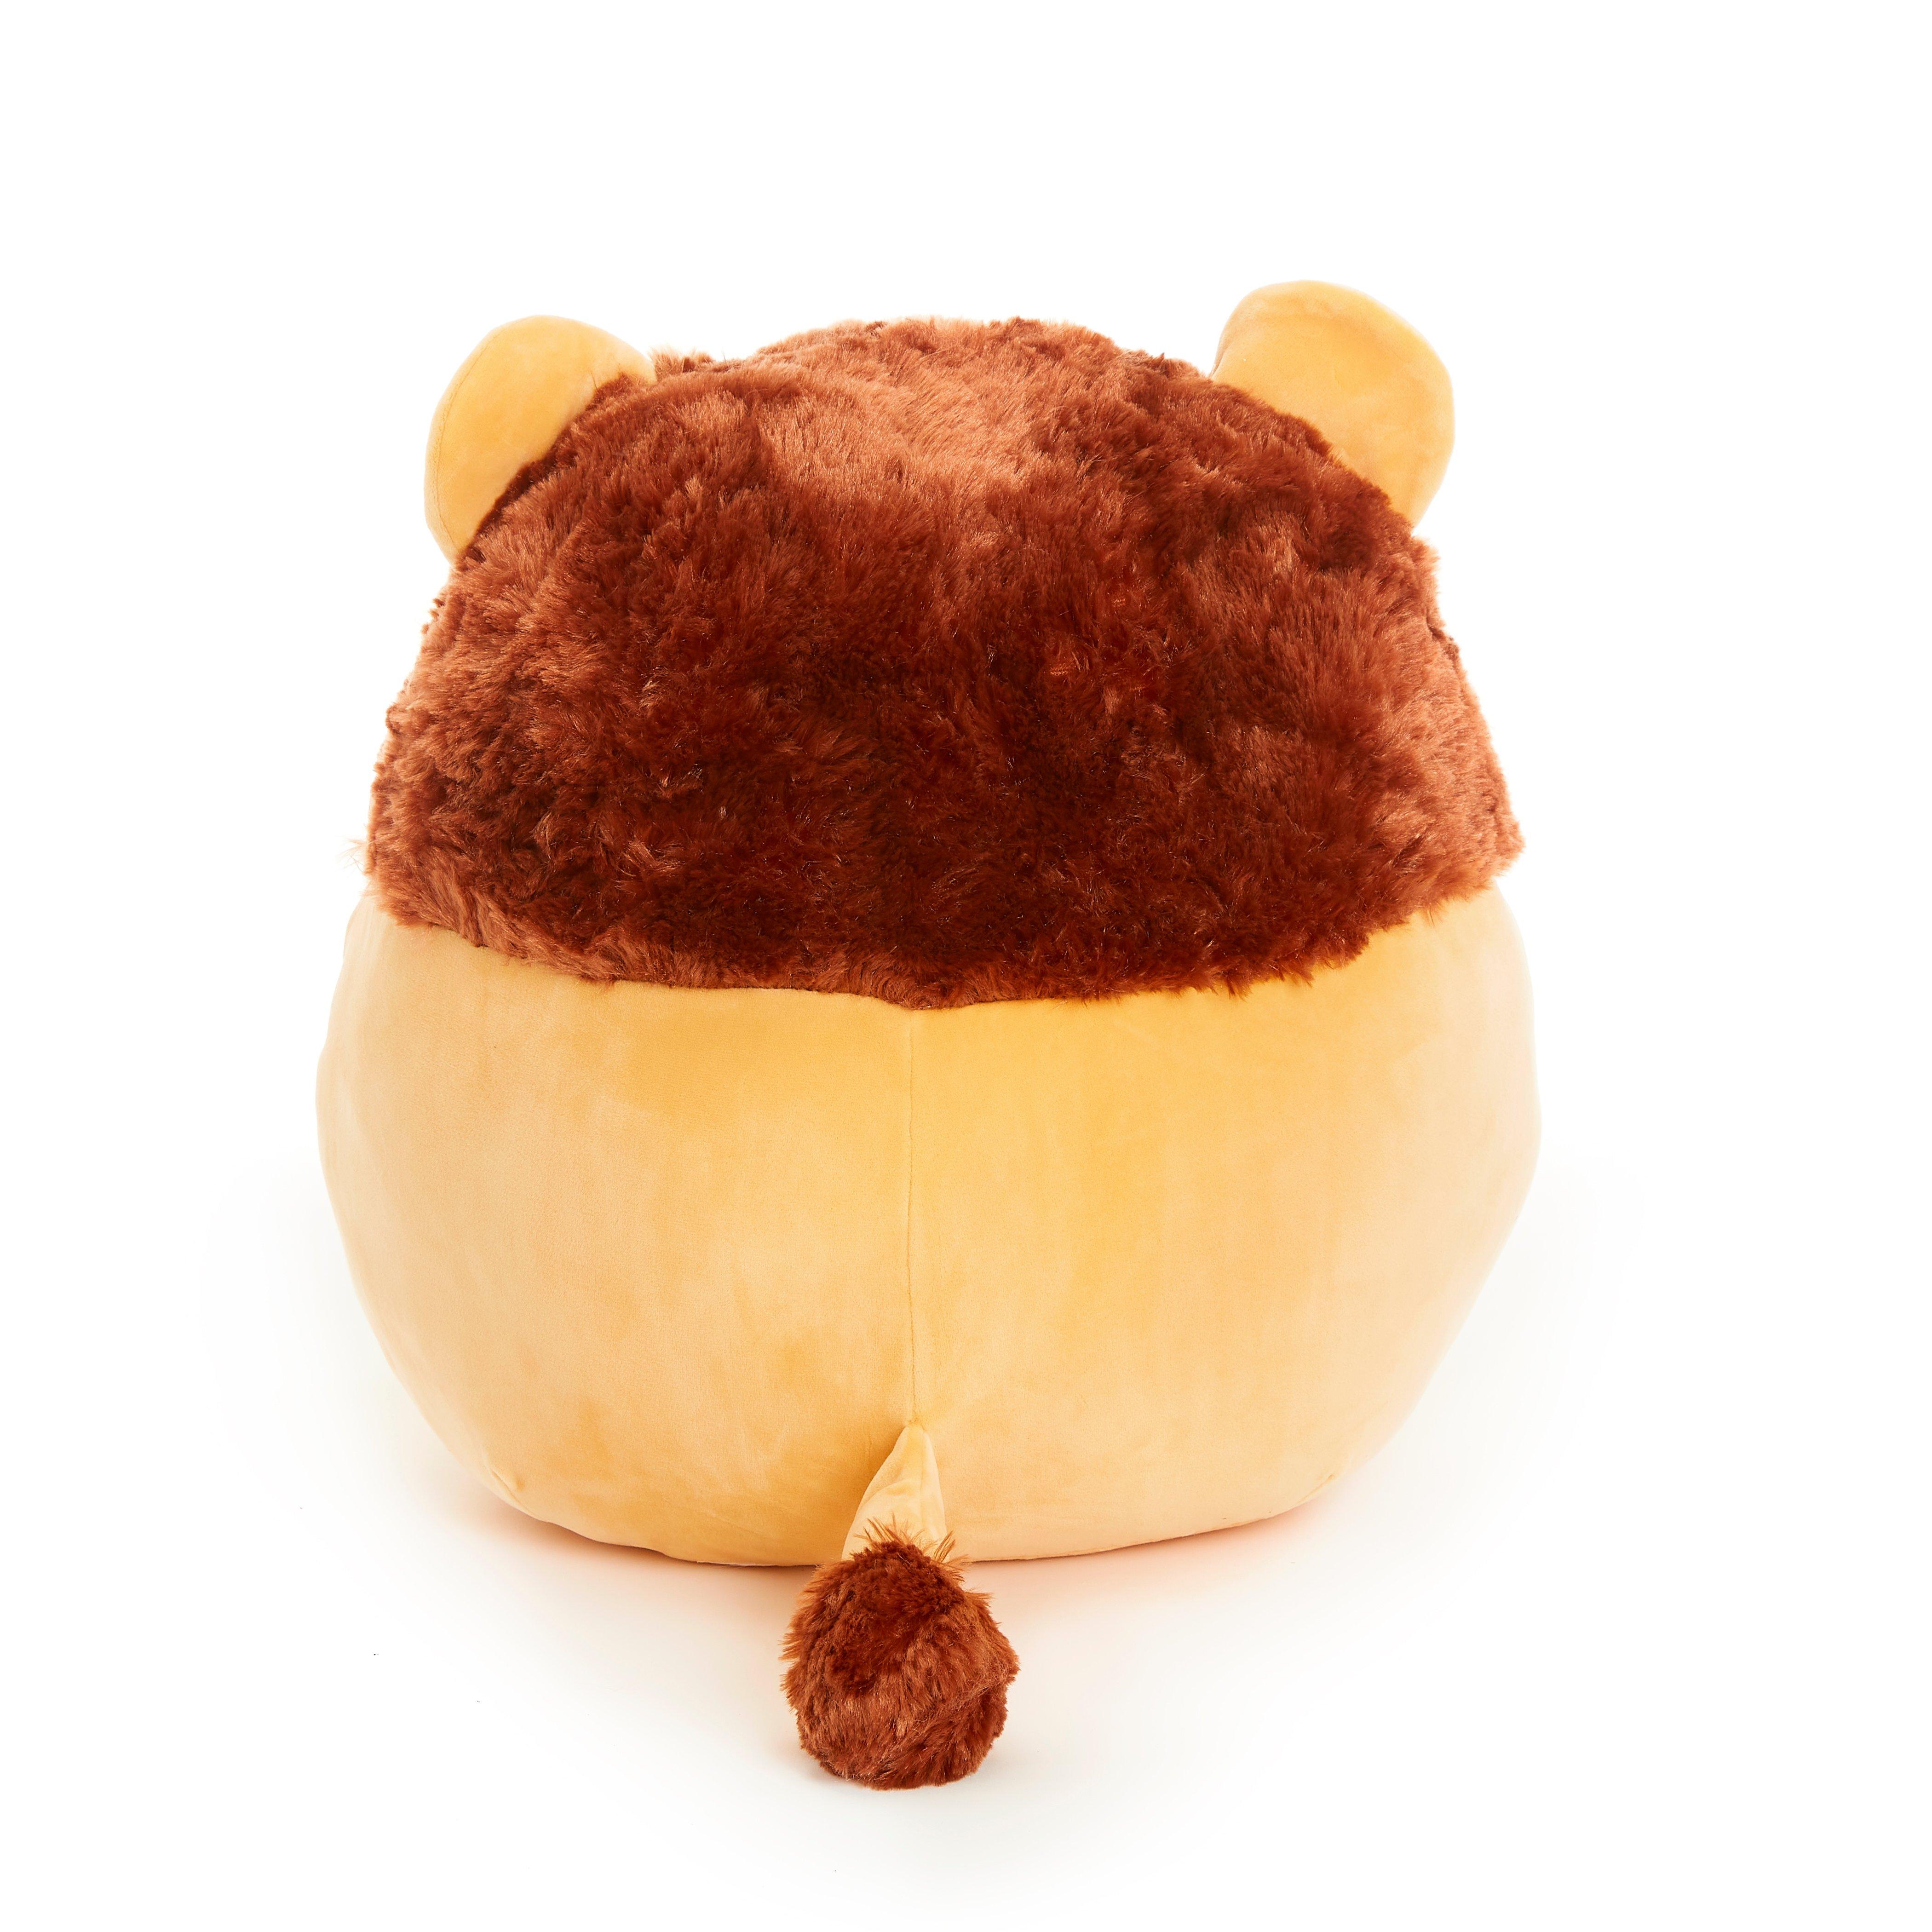 Squishmallows Francis The Lion 16-in Plush